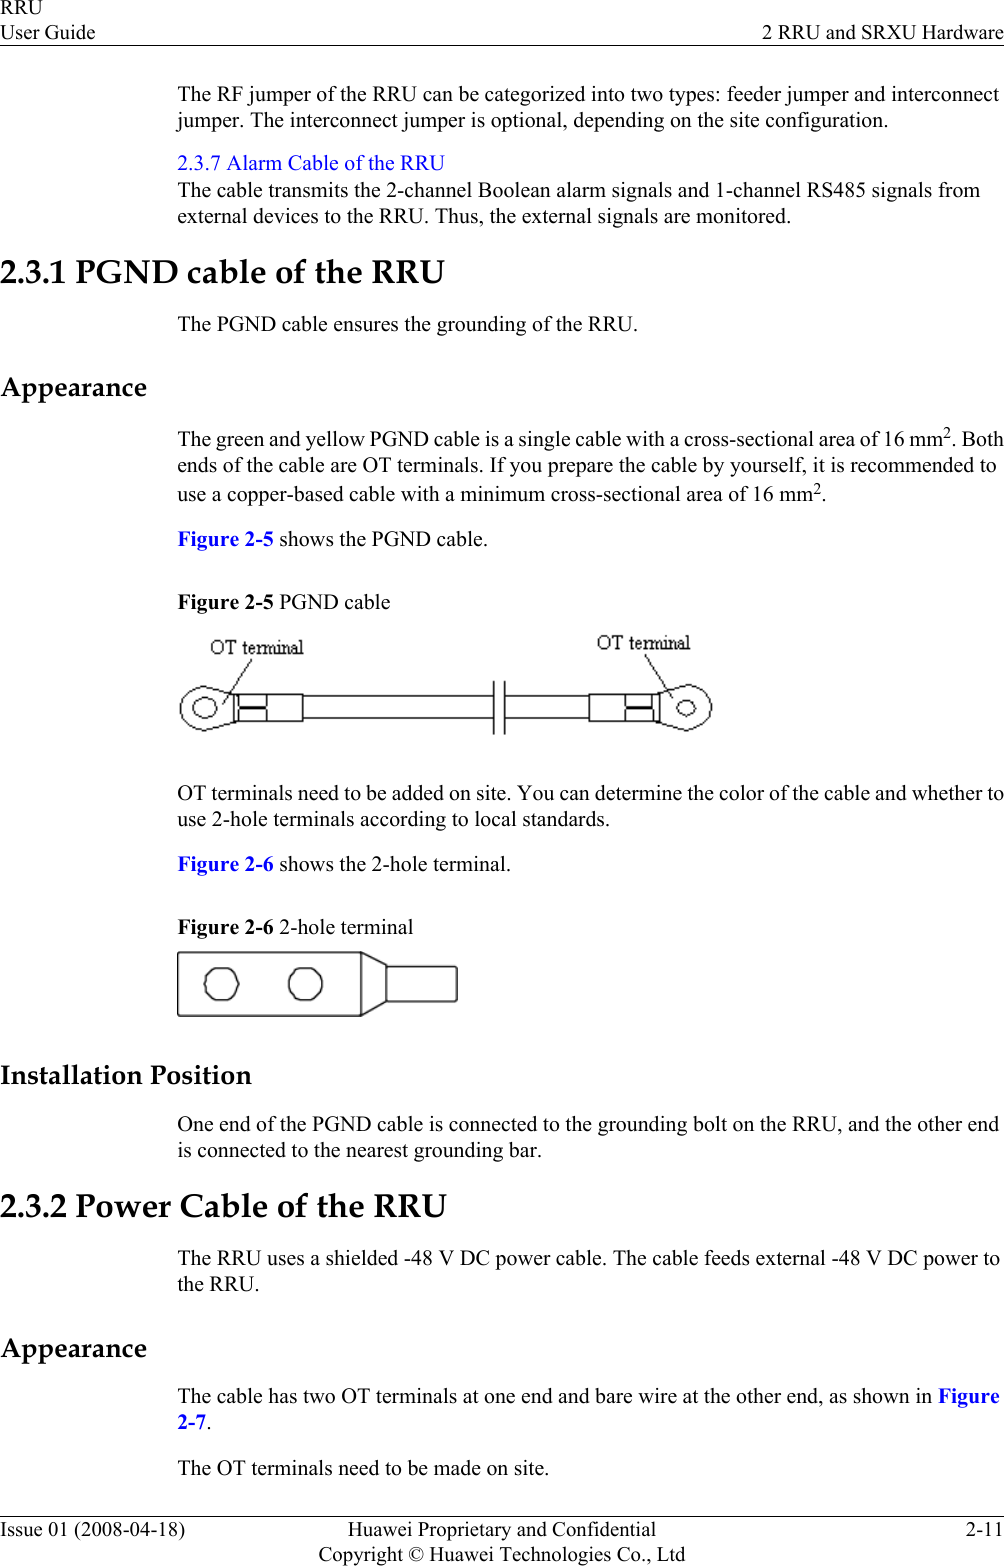 The RF jumper of the RRU can be categorized into two types: feeder jumper and interconnectjumper. The interconnect jumper is optional, depending on the site configuration.2.3.7 Alarm Cable of the RRUThe cable transmits the 2-channel Boolean alarm signals and 1-channel RS485 signals fromexternal devices to the RRU. Thus, the external signals are monitored.2.3.1 PGND cable of the RRUThe PGND cable ensures the grounding of the RRU.AppearanceThe green and yellow PGND cable is a single cable with a cross-sectional area of 16 mm2. Bothends of the cable are OT terminals. If you prepare the cable by yourself, it is recommended touse a copper-based cable with a minimum cross-sectional area of 16 mm2.Figure 2-5 shows the PGND cable.Figure 2-5 PGND cableOT terminals need to be added on site. You can determine the color of the cable and whether touse 2-hole terminals according to local standards.Figure 2-6 shows the 2-hole terminal.Figure 2-6 2-hole terminalInstallation PositionOne end of the PGND cable is connected to the grounding bolt on the RRU, and the other endis connected to the nearest grounding bar.2.3.2 Power Cable of the RRUThe RRU uses a shielded -48 V DC power cable. The cable feeds external -48 V DC power tothe RRU.AppearanceThe cable has two OT terminals at one end and bare wire at the other end, as shown in Figure2-7.The OT terminals need to be made on site.RRUUser Guide 2 RRU and SRXU HardwareIssue 01 (2008-04-18) Huawei Proprietary and ConfidentialCopyright © Huawei Technologies Co., Ltd2-11